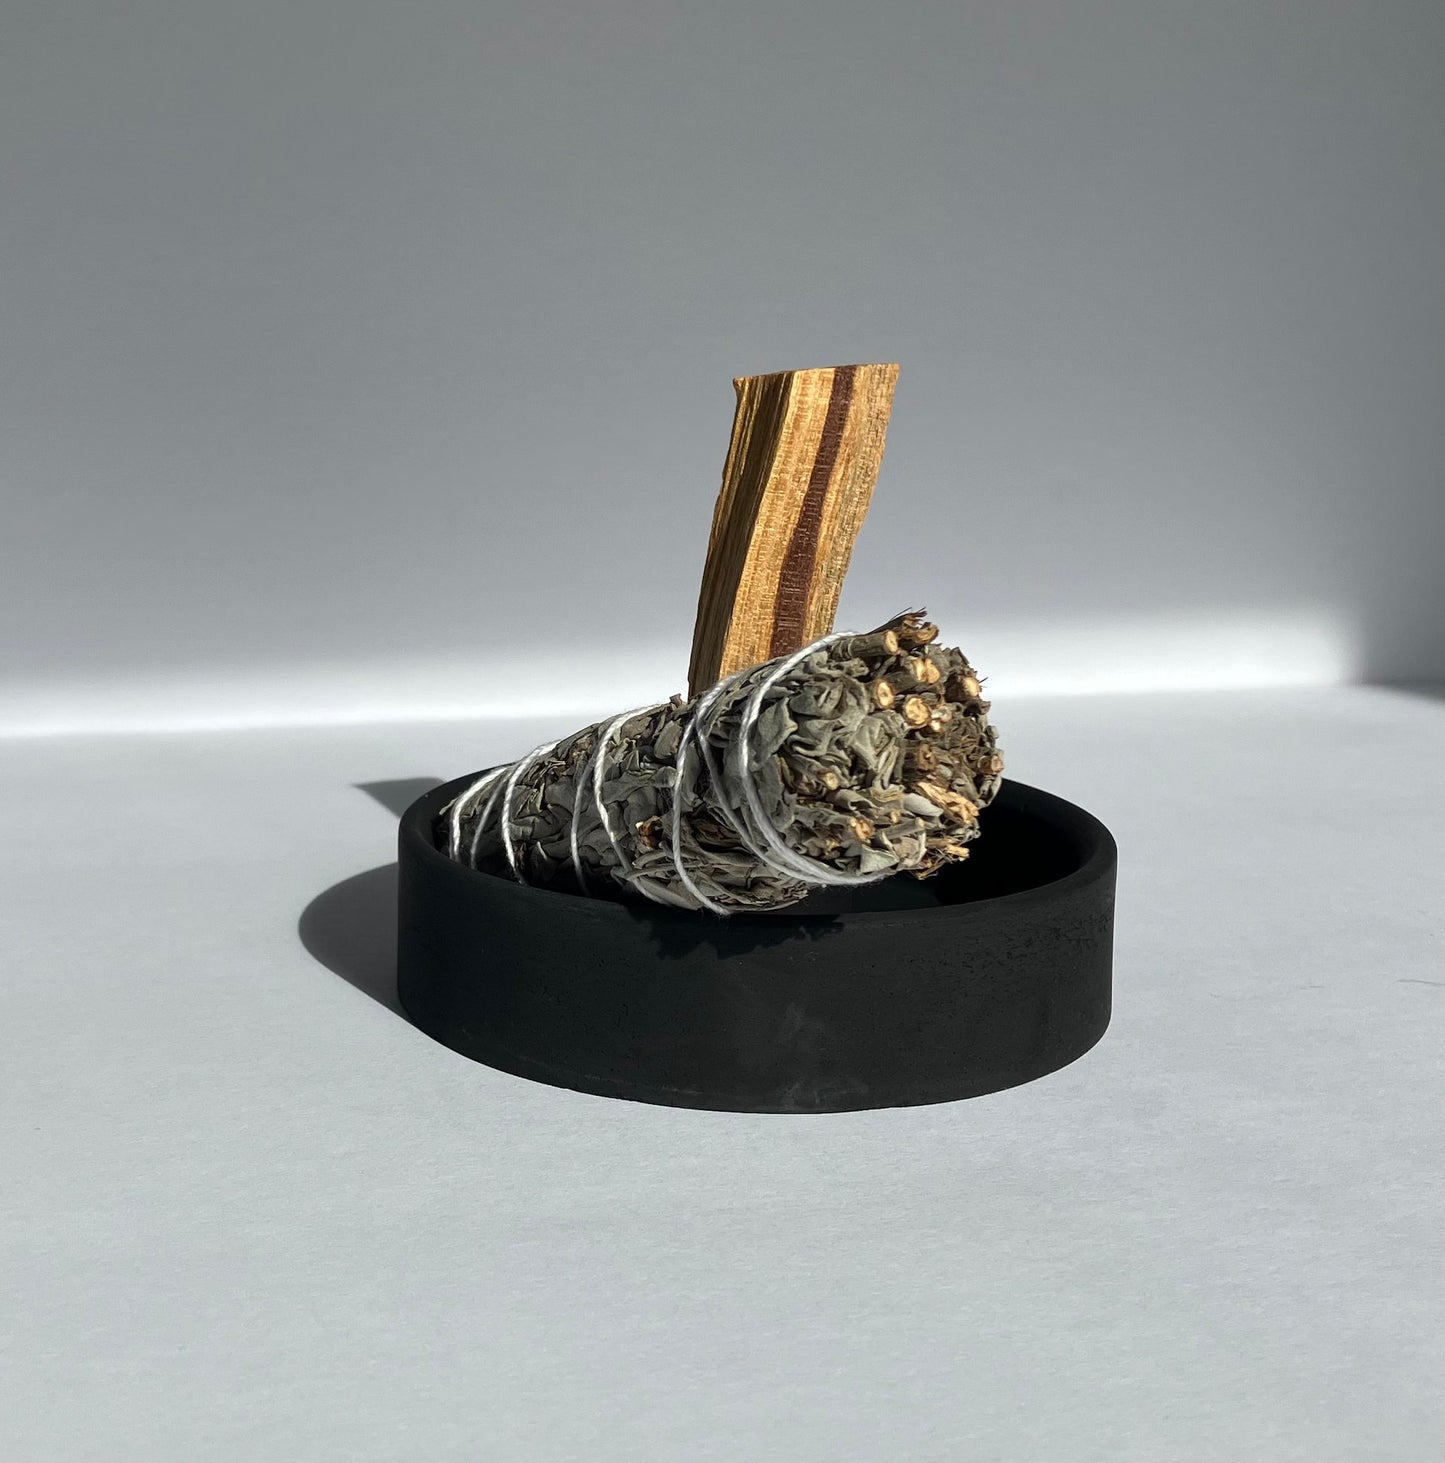 Smouldering Embers - Concrete Palo Santo and Sage Holder